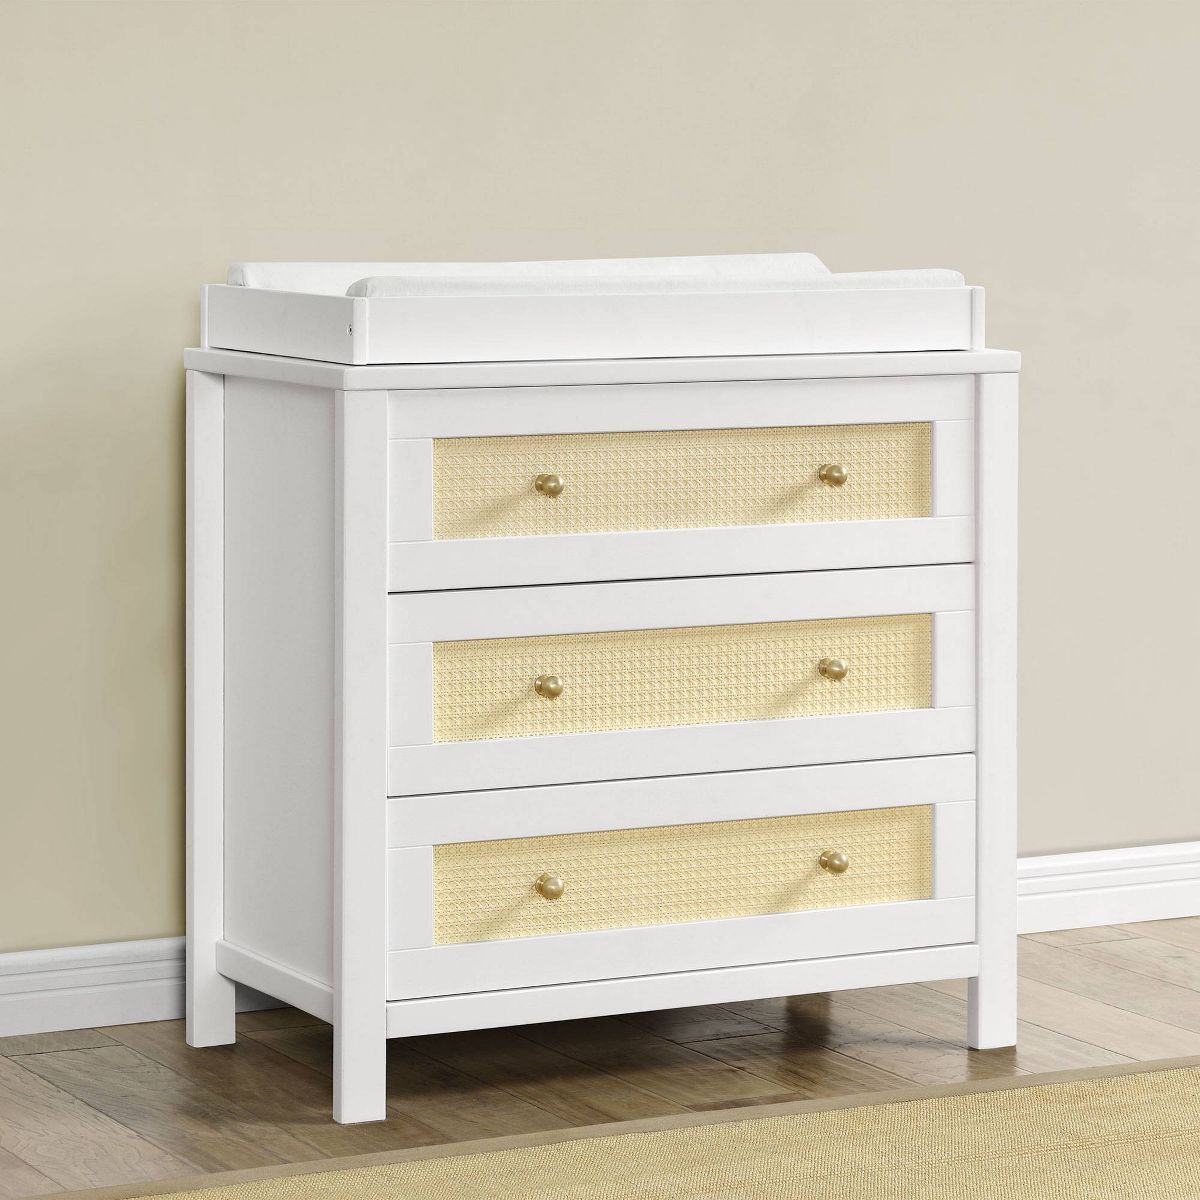 Simmons Kids' Theo 3 Drawer Dresser with Changing Top - Greenguard Gold Certified | Target